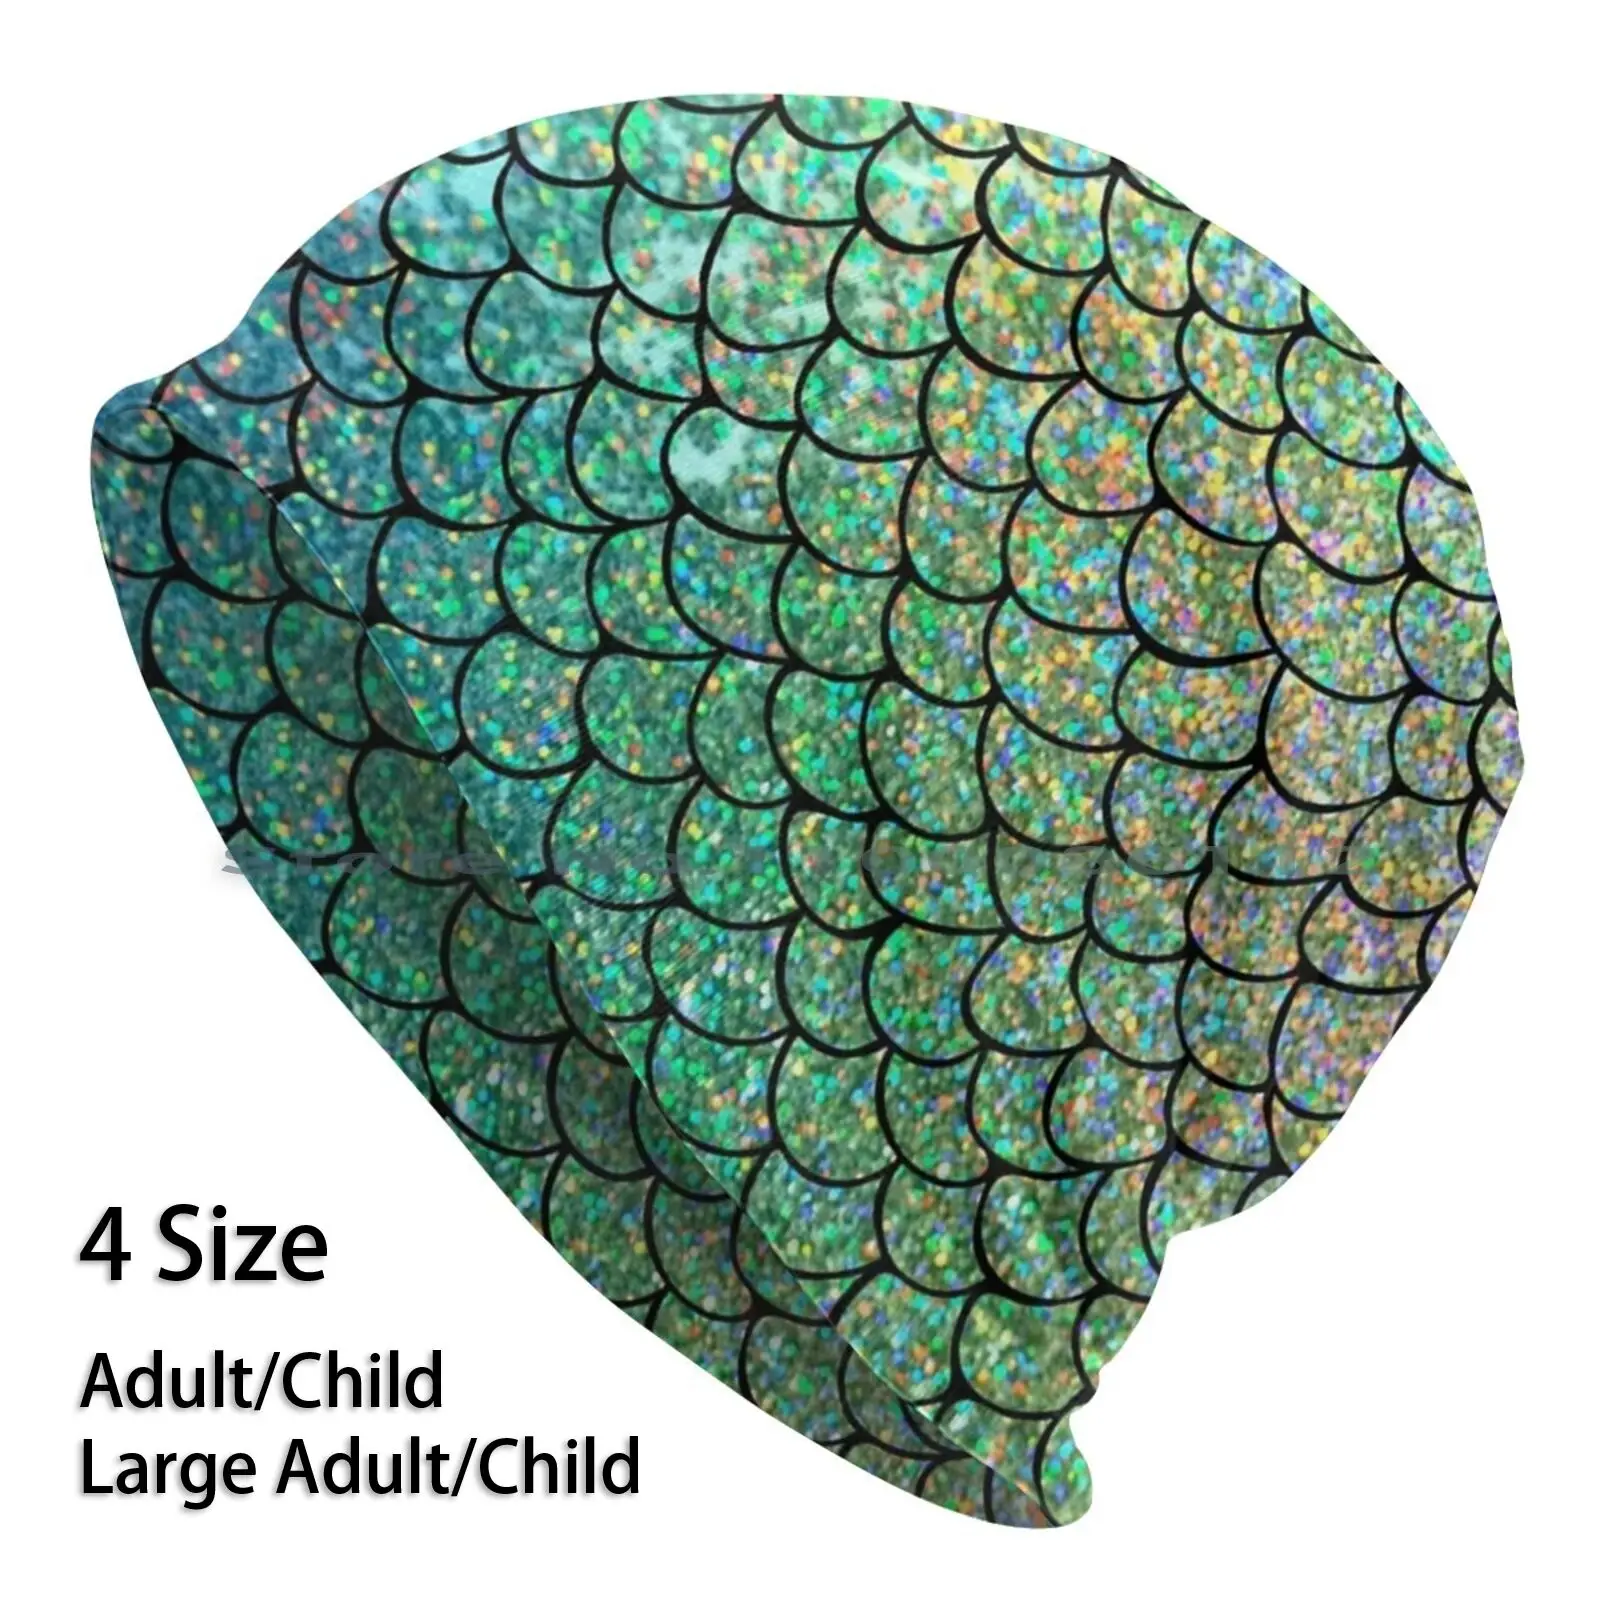 

Colorful Glitter Mermaid Scales Beanies Knit Hat Mermaid Fairy Tale Scales Whale Tail Animal Arctic Sea Ocean Fish Dolphin